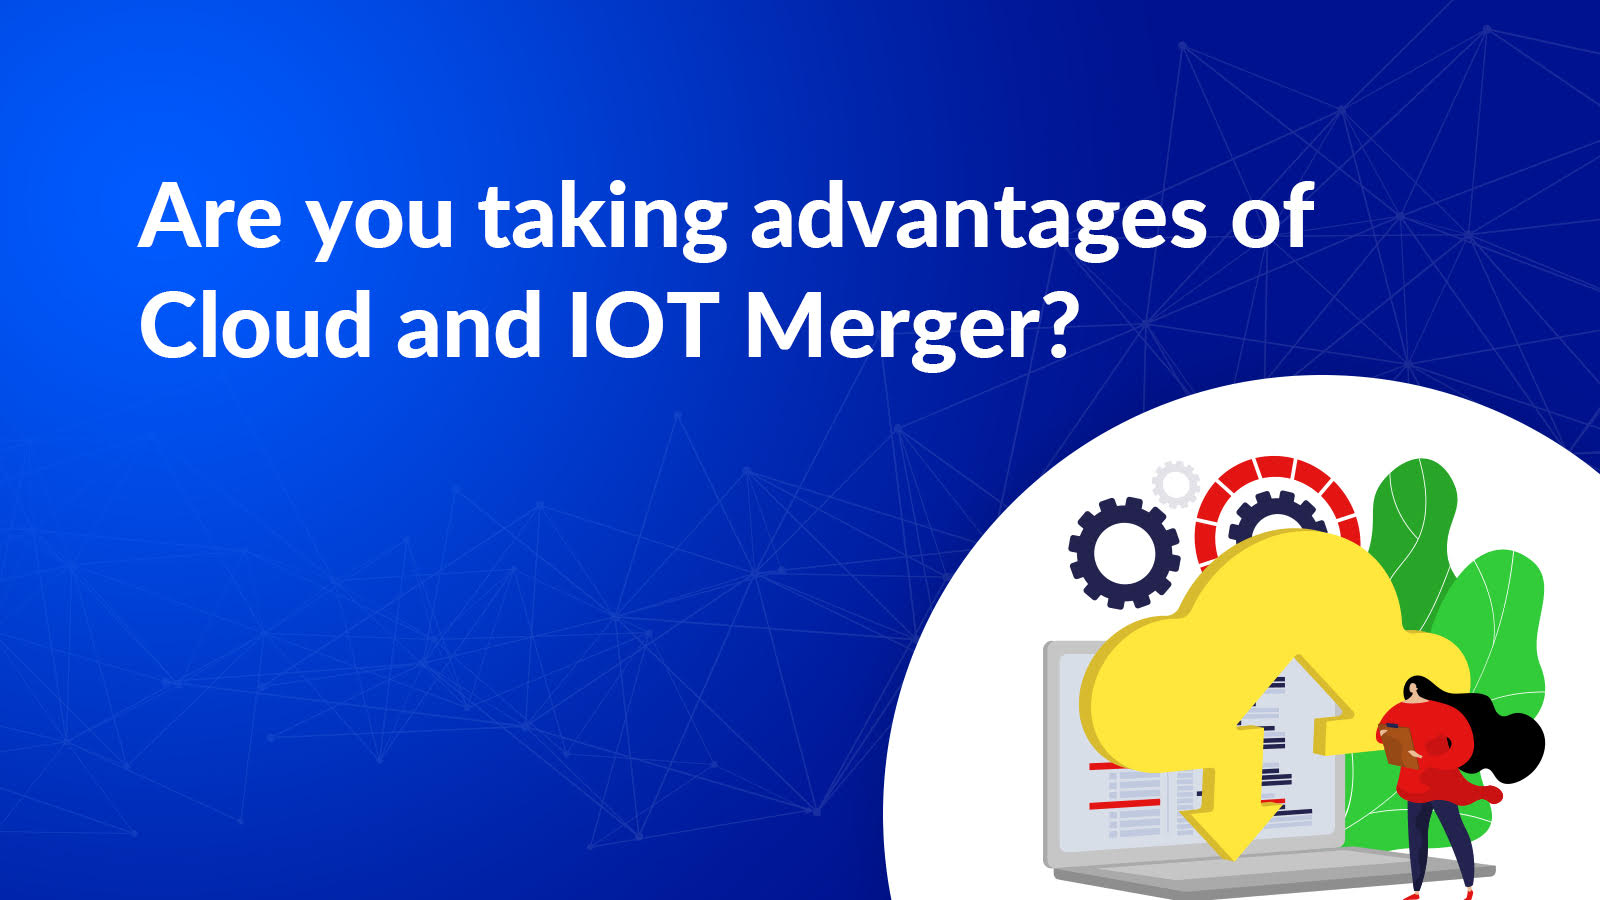 Advantages of Cloud and IOT Merger